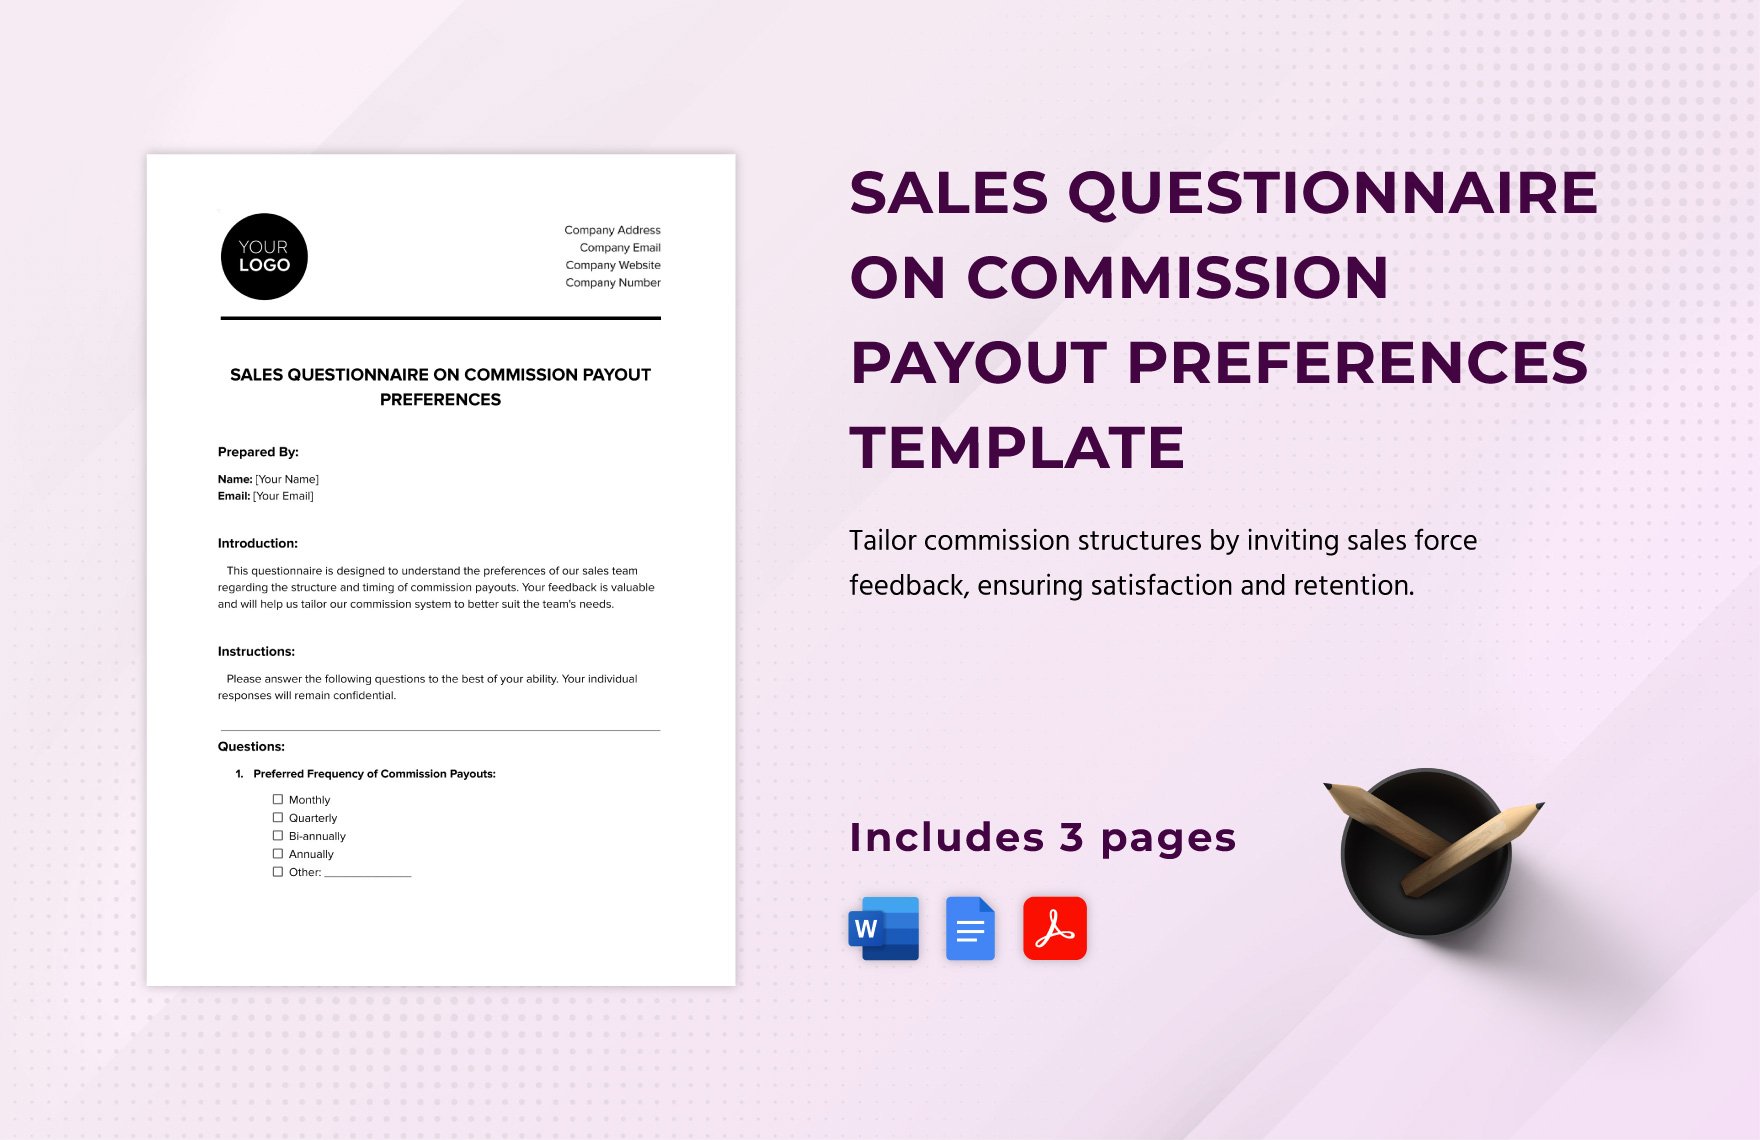 Sales Questionnaire on Commission Payout Preferences Template in Word, Google Docs, PDF